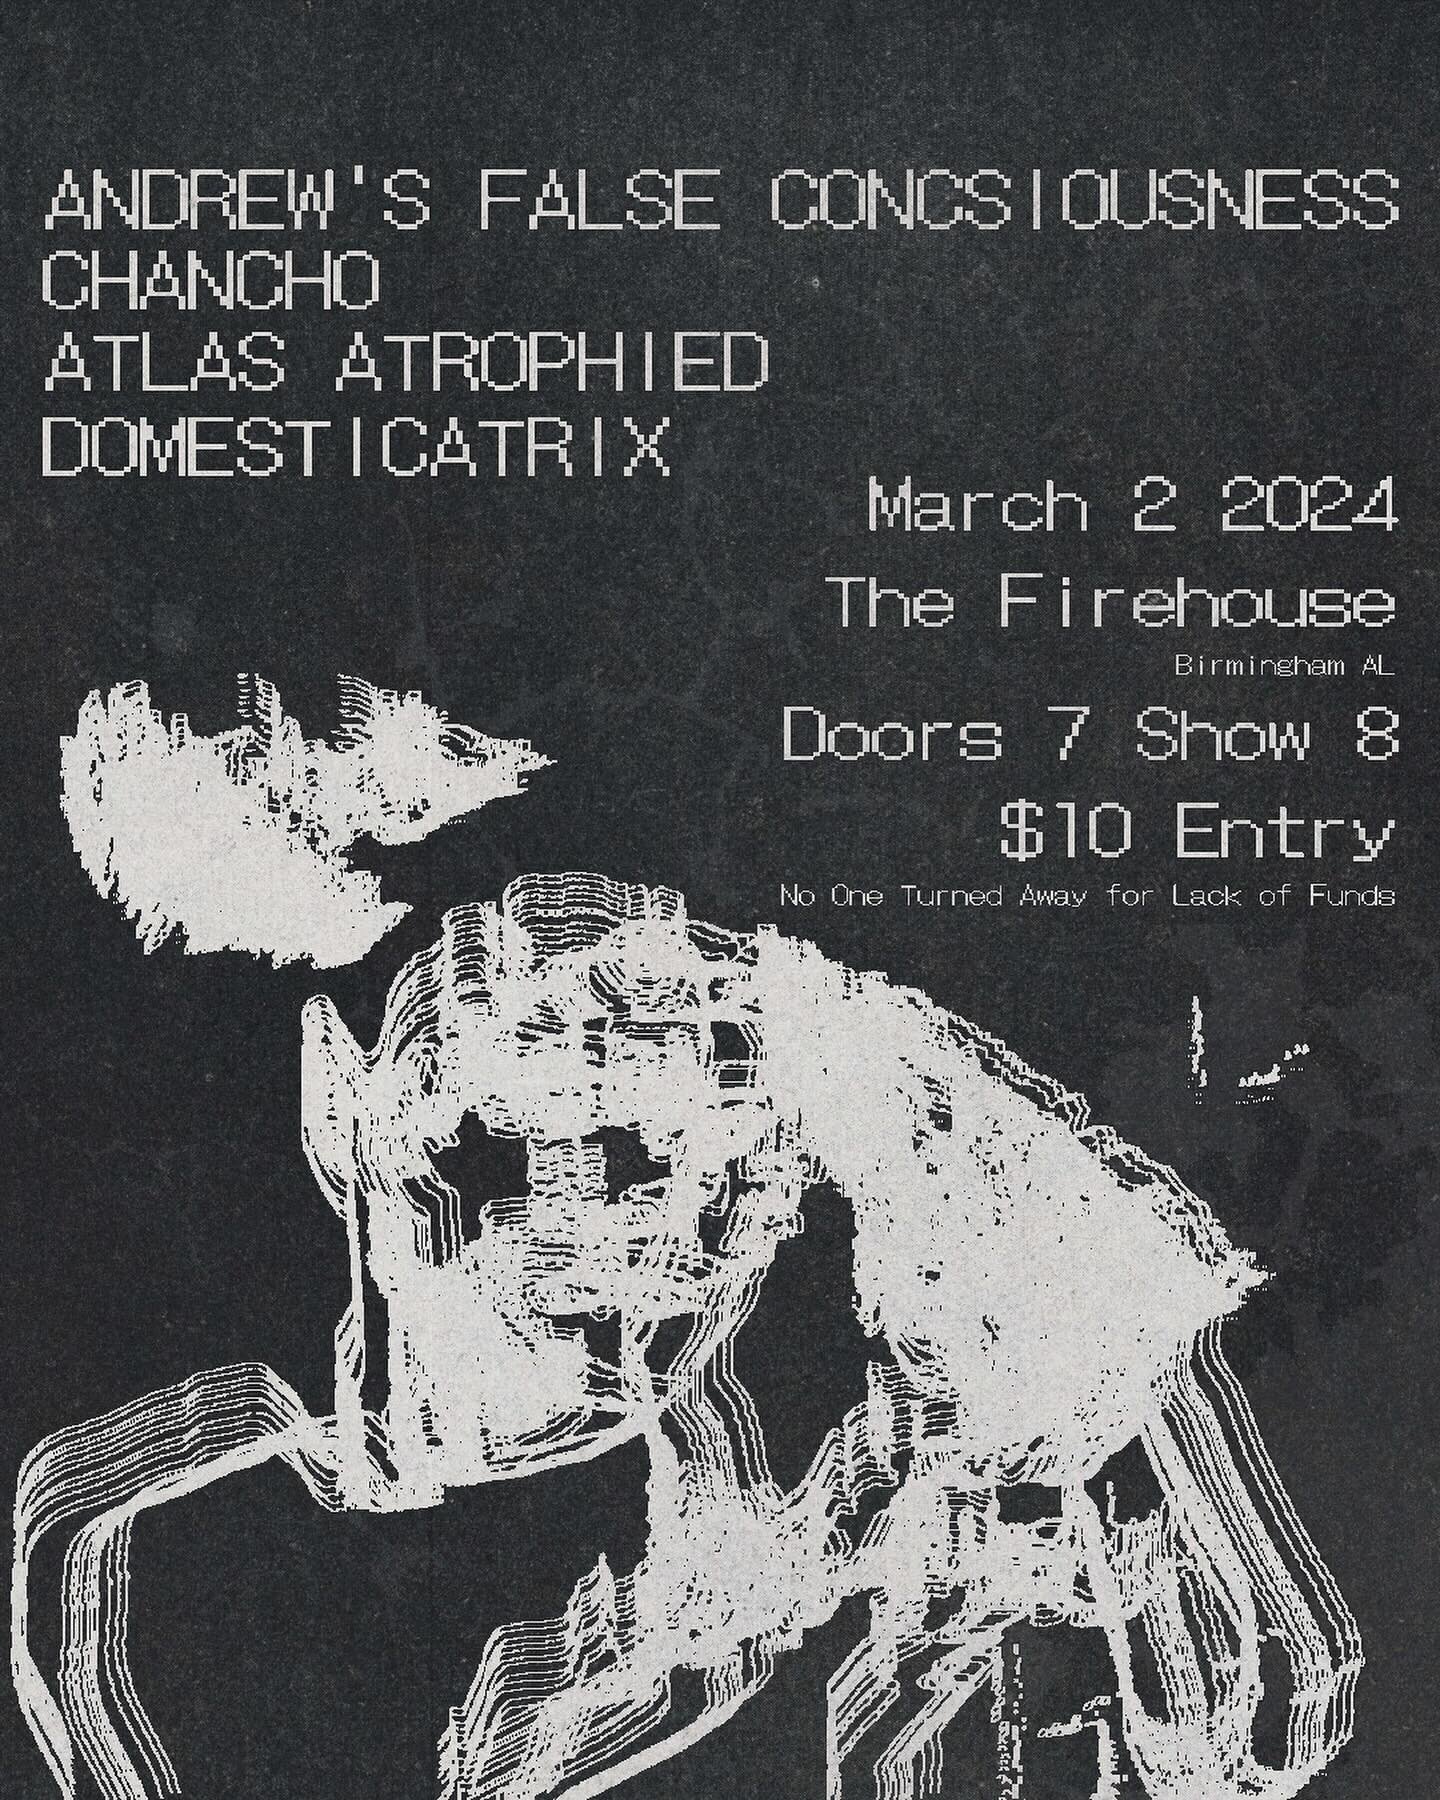 This Saturday, we&rsquo;ve got an electronic show that will captivate the senses and delight the ears. Andrew&rsquo;s False Consciousness (North Carolina Noisy Hyperpop) with locals @chancho.bmt @domesticatrixbham and @atlasatrophied (auburn).

Flier